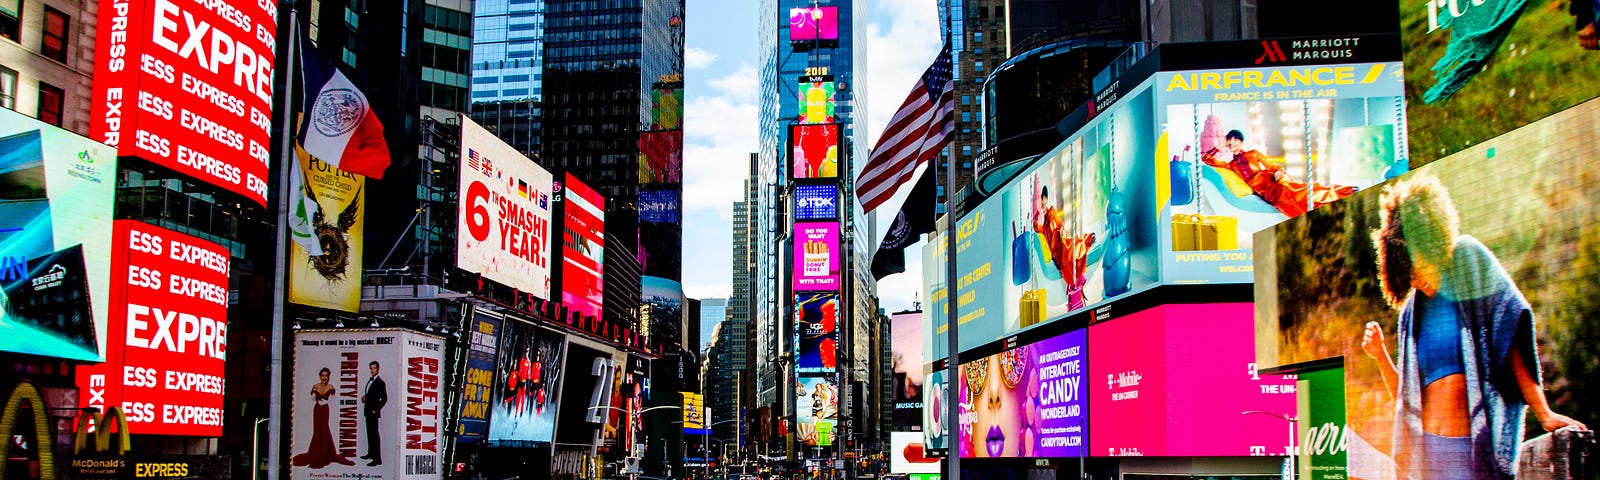 Photograph of New York City’s Times Square at night with many ads in background